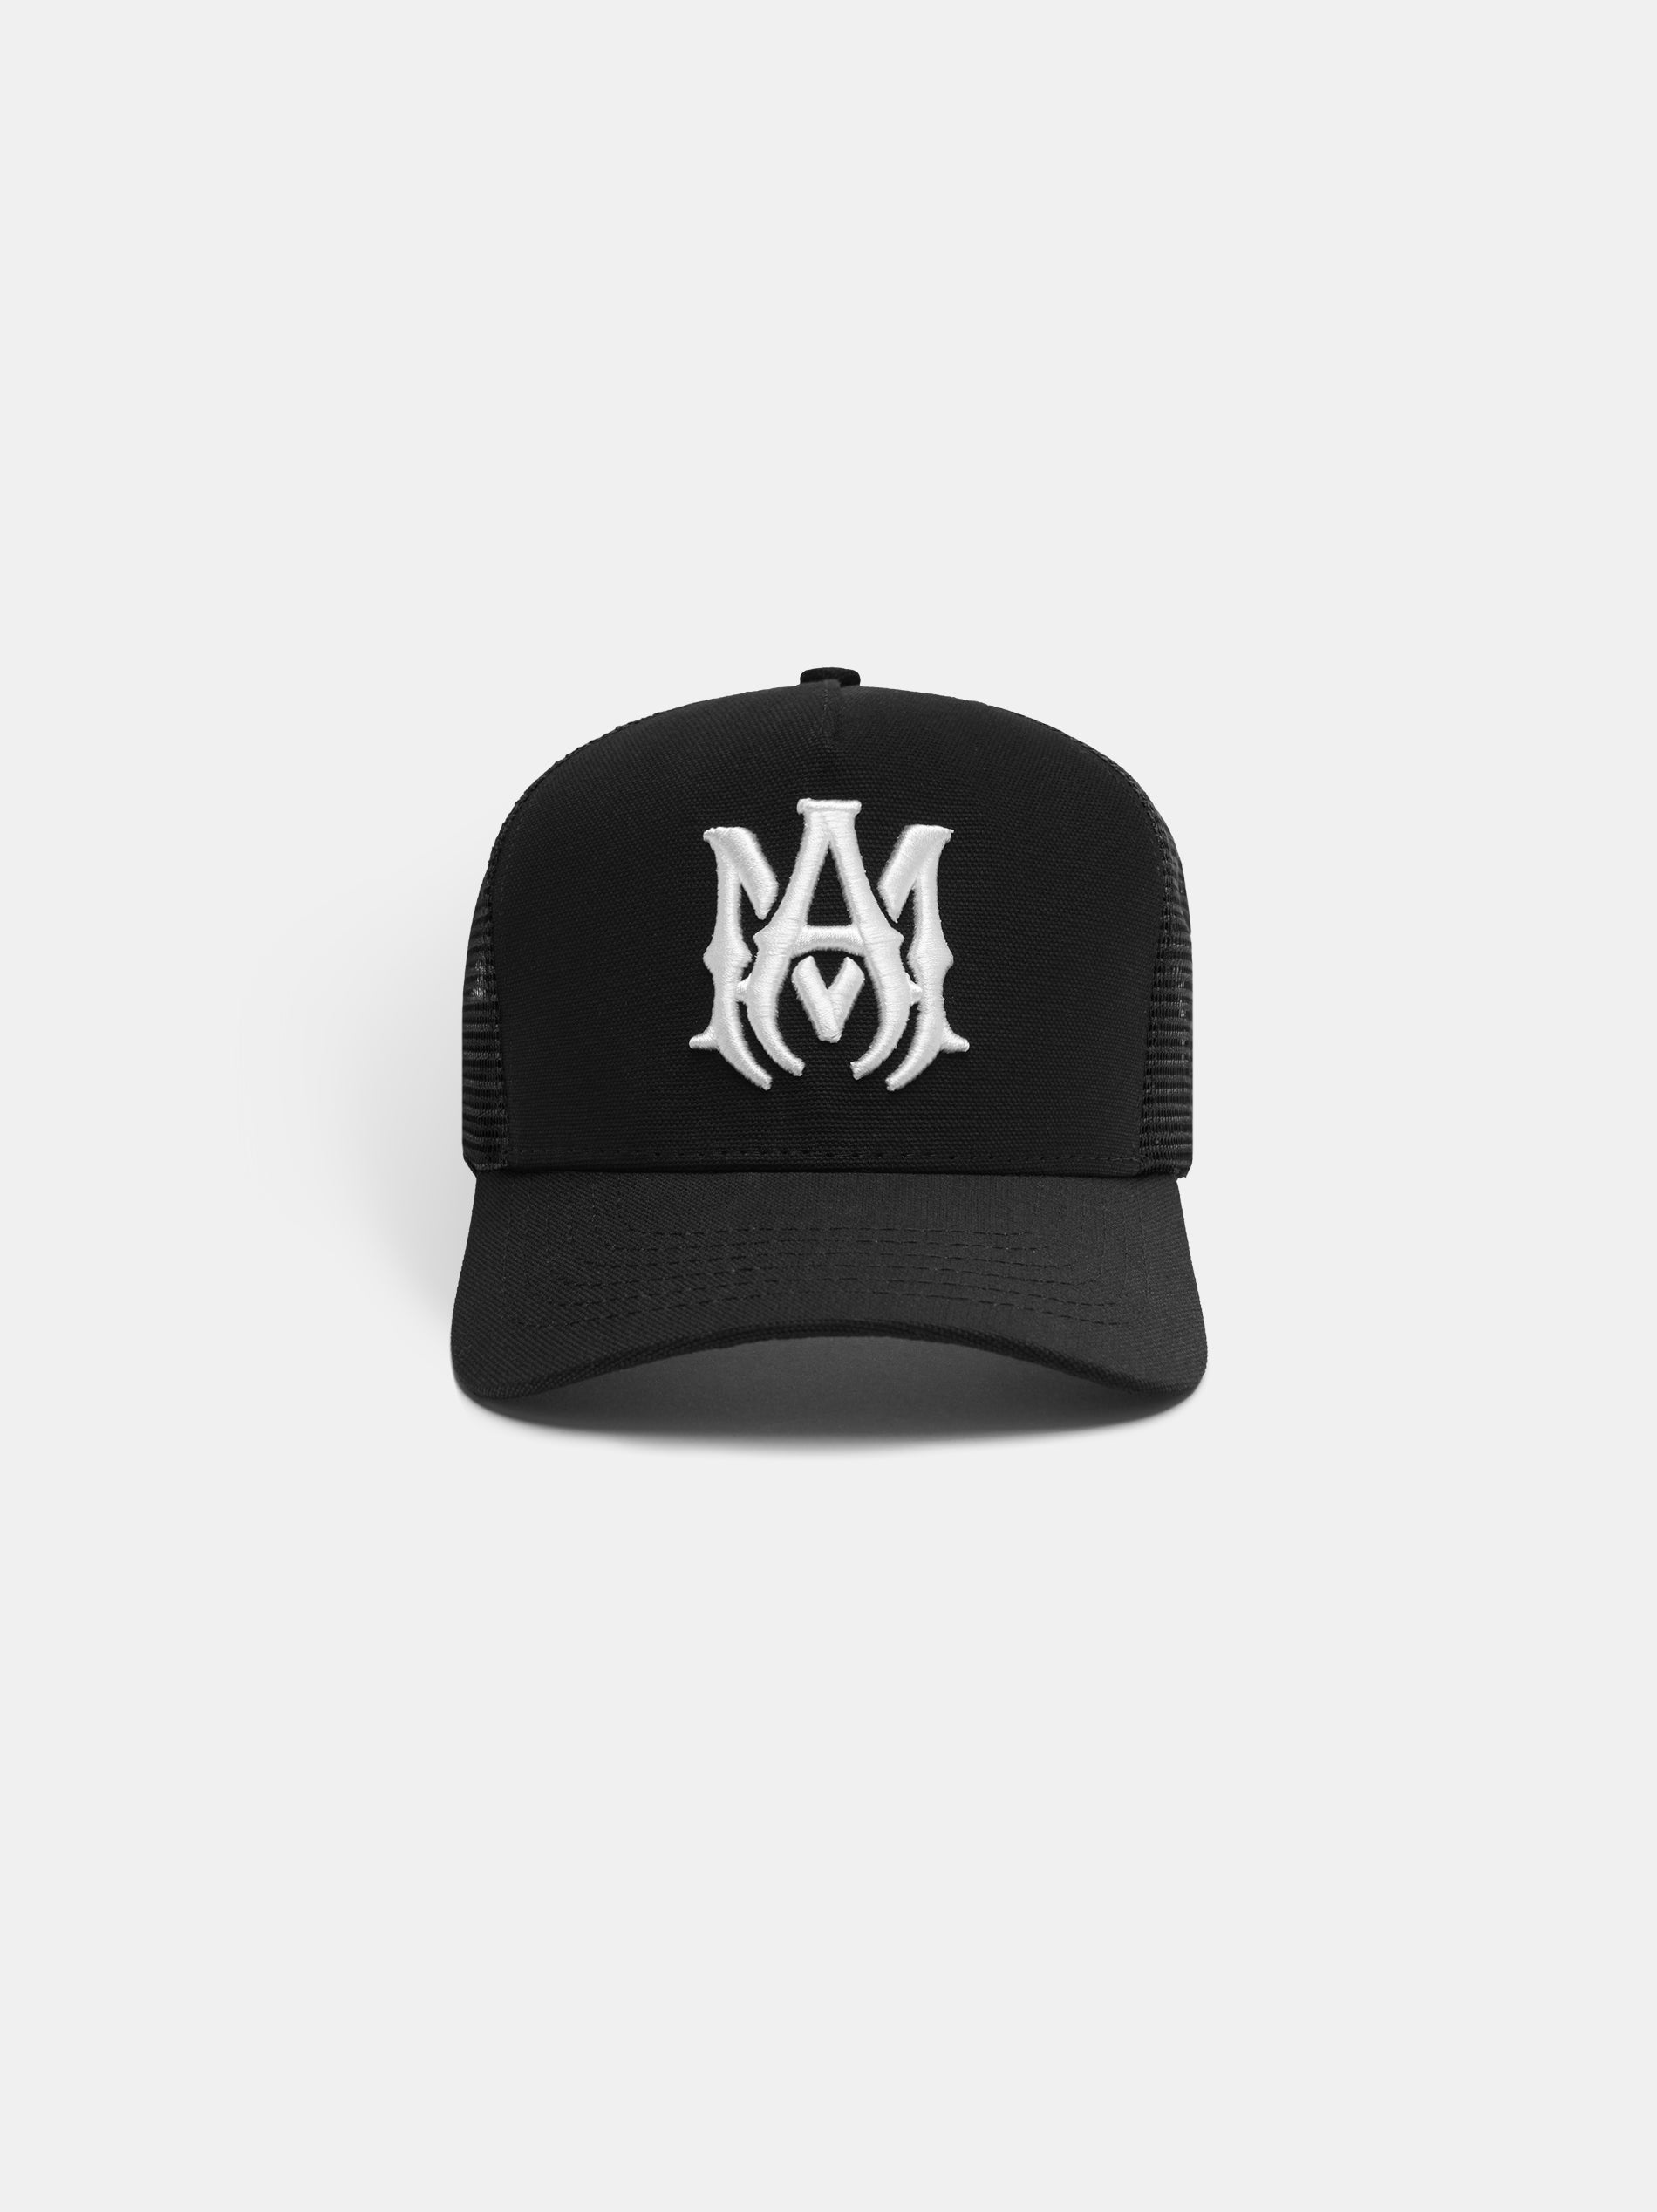 Product KIDS - KIDS' MA TRUCKER HAT - Black featured image